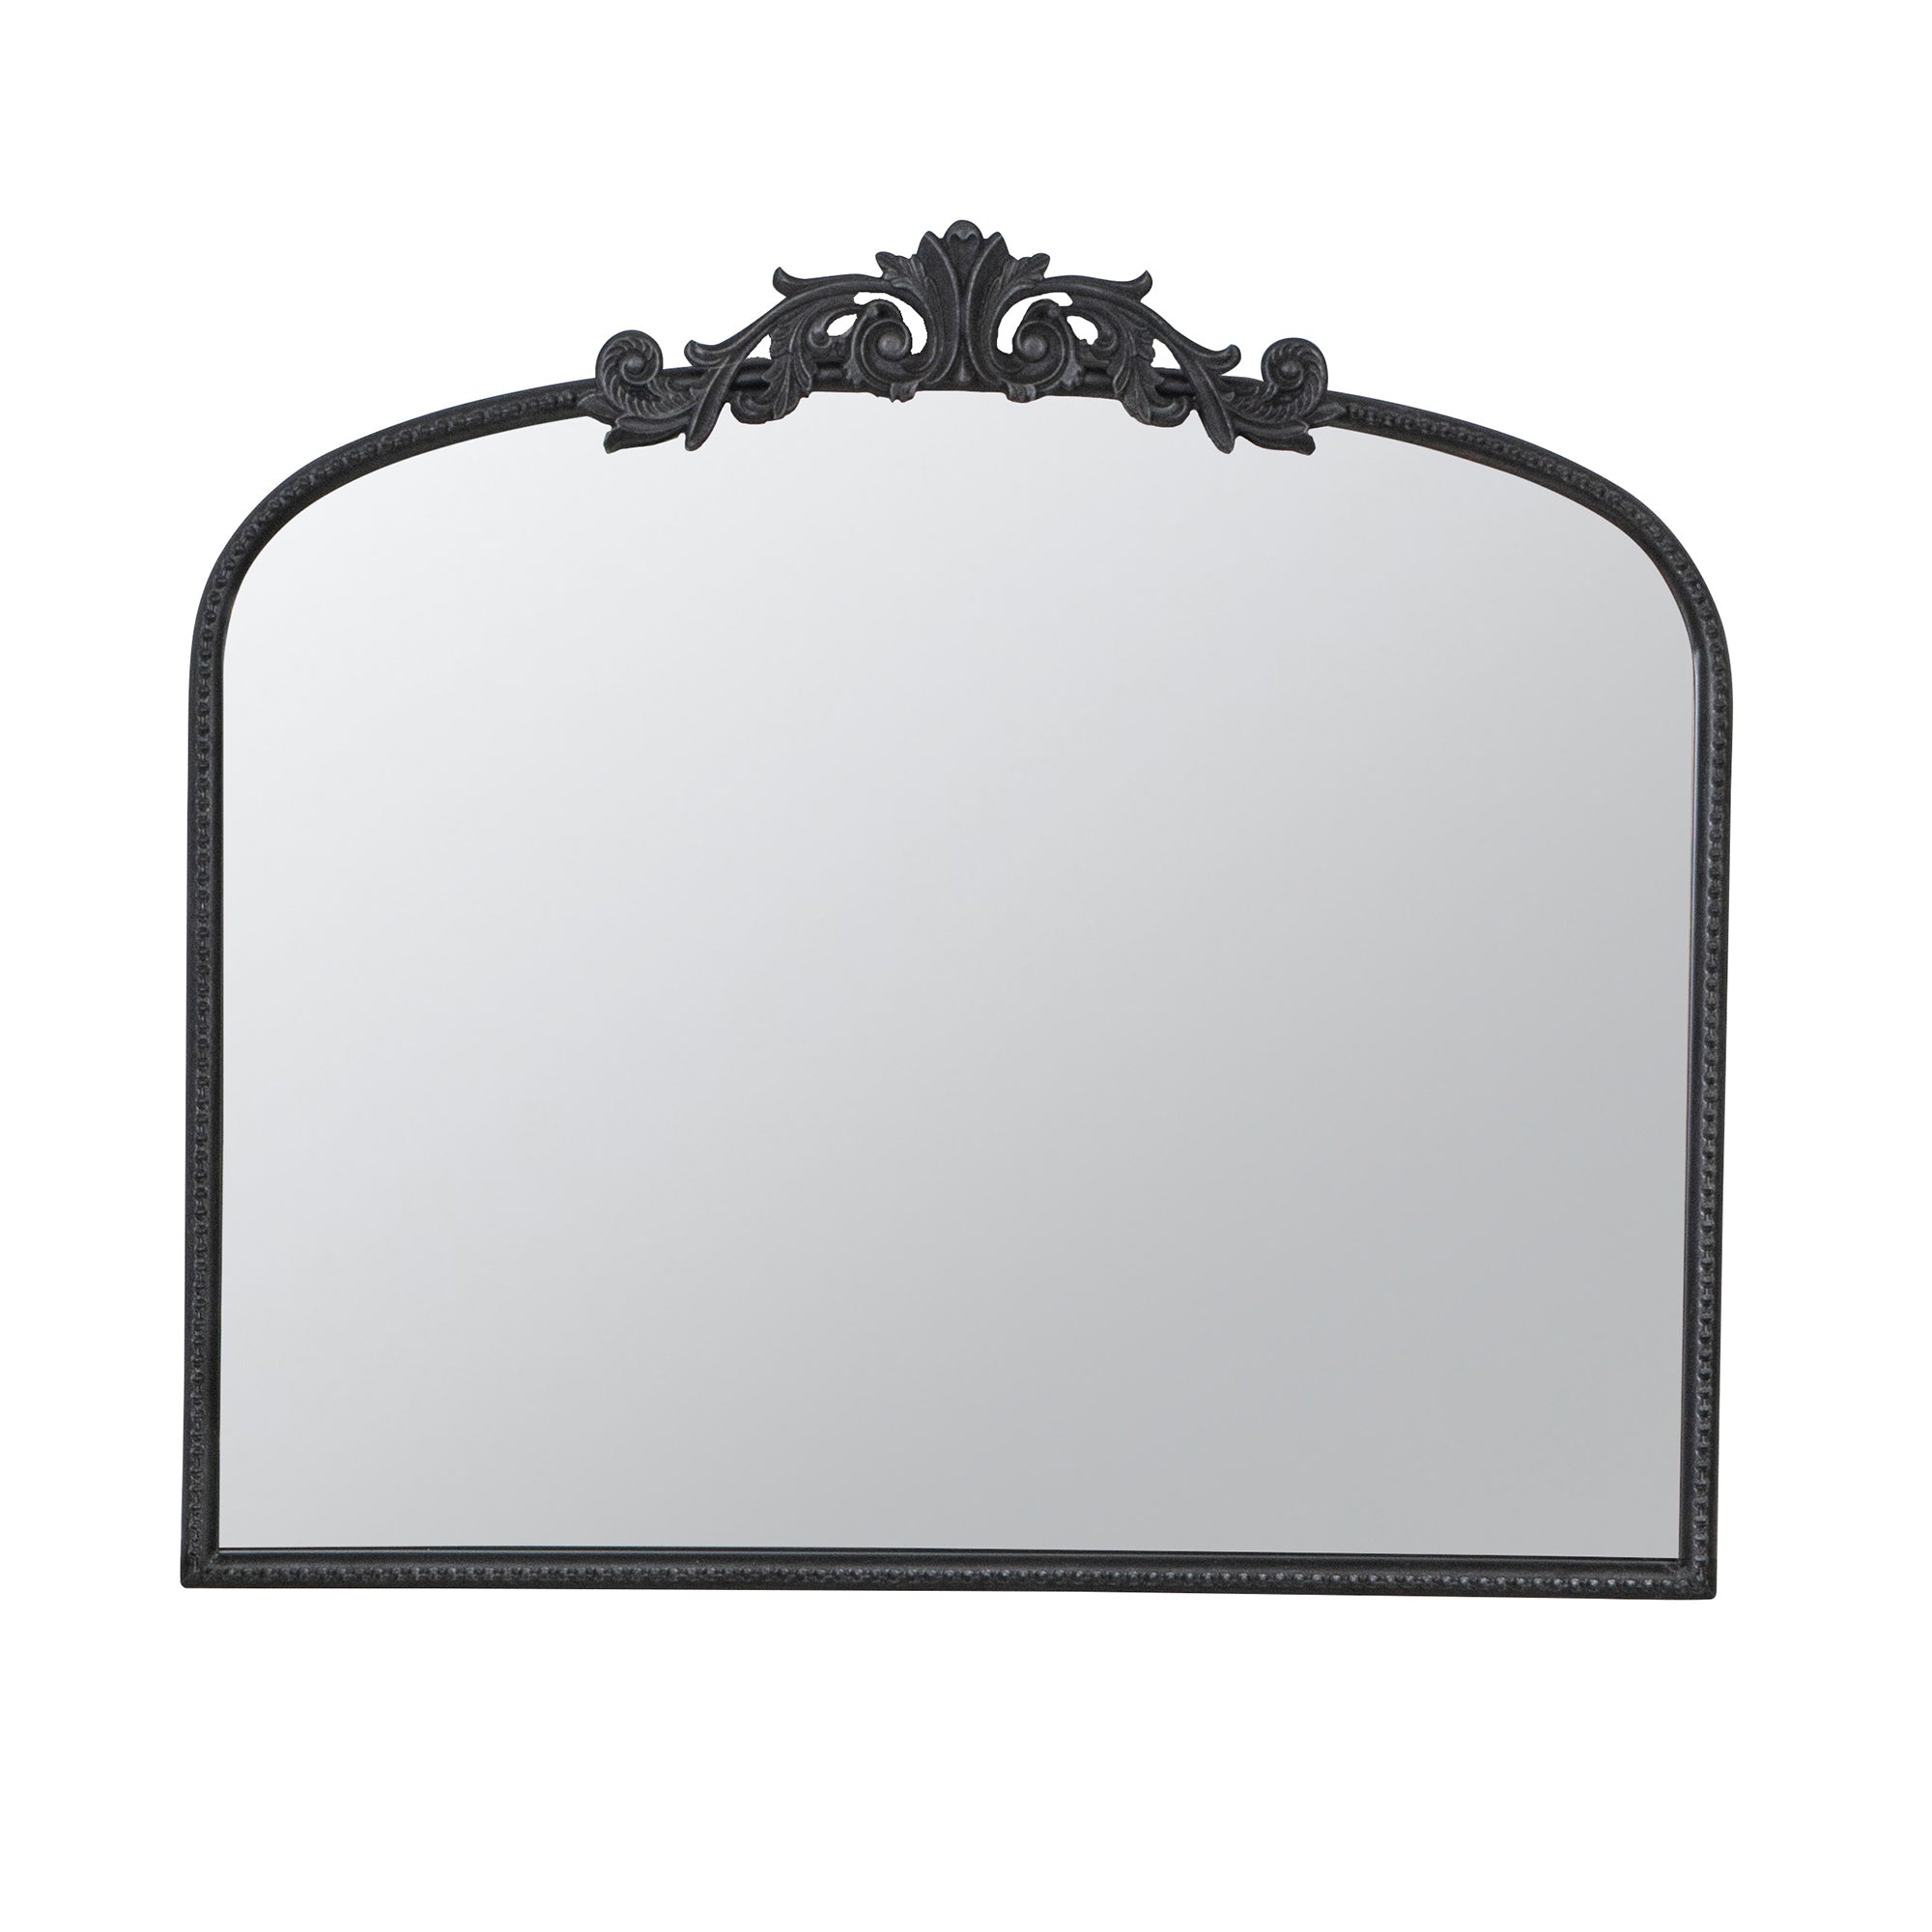 40" x 31" Classic Design Large Arch Mirror and Baroque black-glass